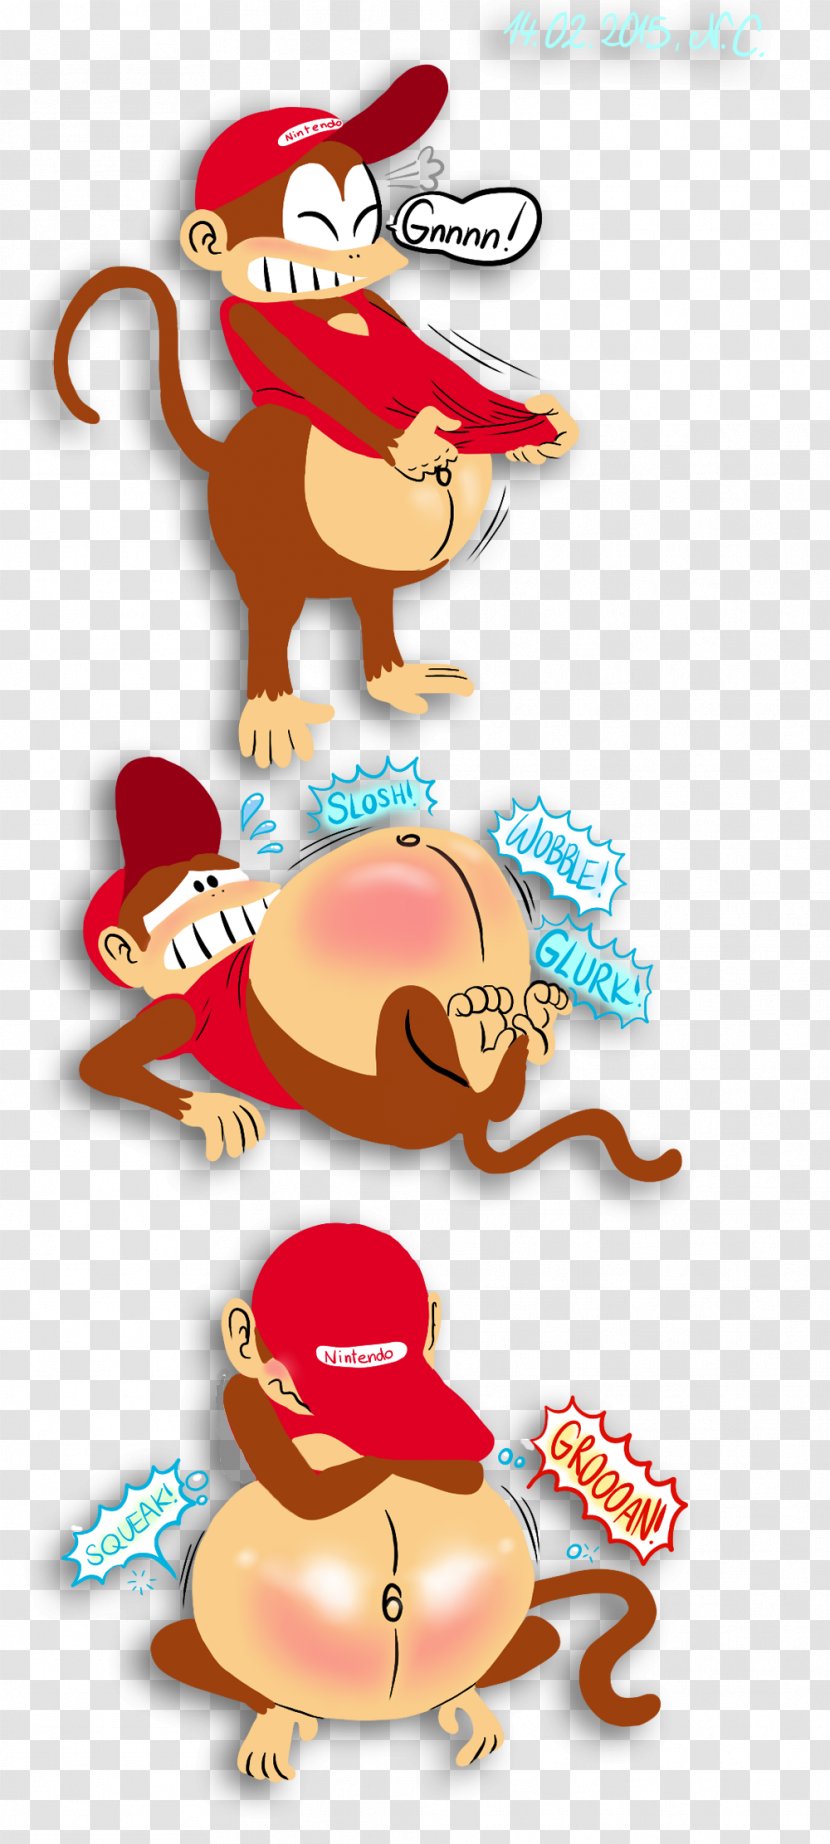 Donkey Kong Country 2: Diddy's Quest Country: Tropical Freeze Diddy Dixie Nintendo Switch - Cartoon - Tree Transparent PNG